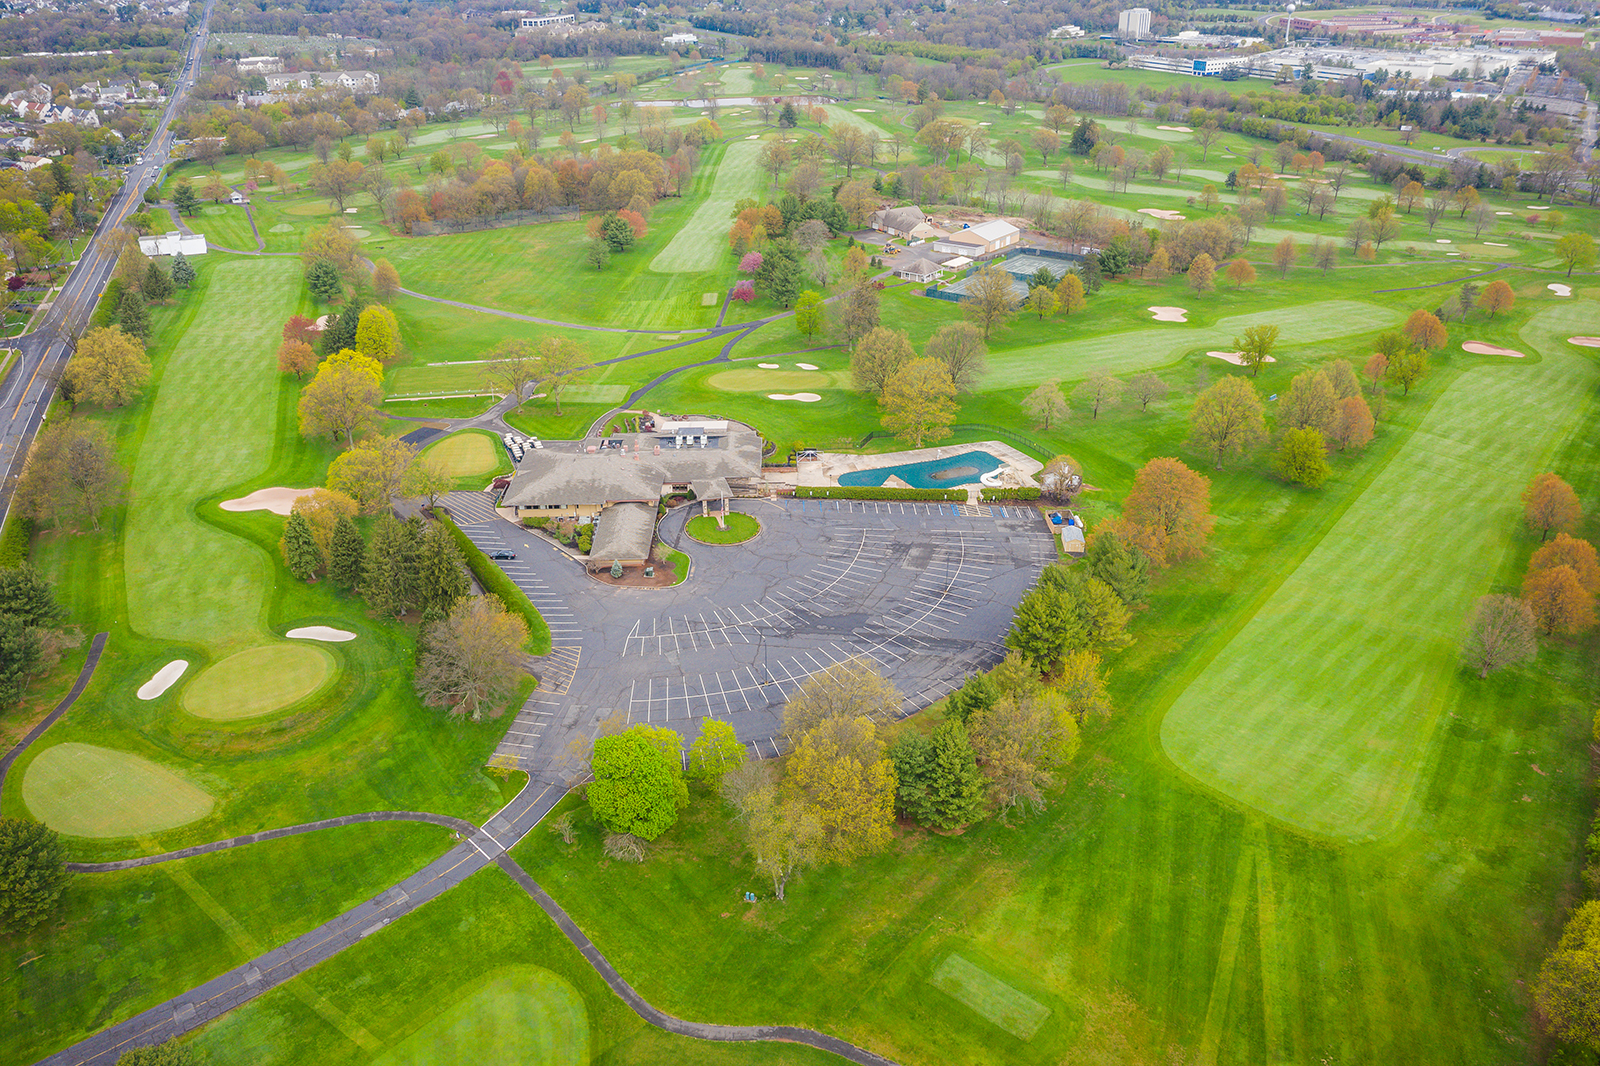 An aerial view of a golf course in New Jersey.